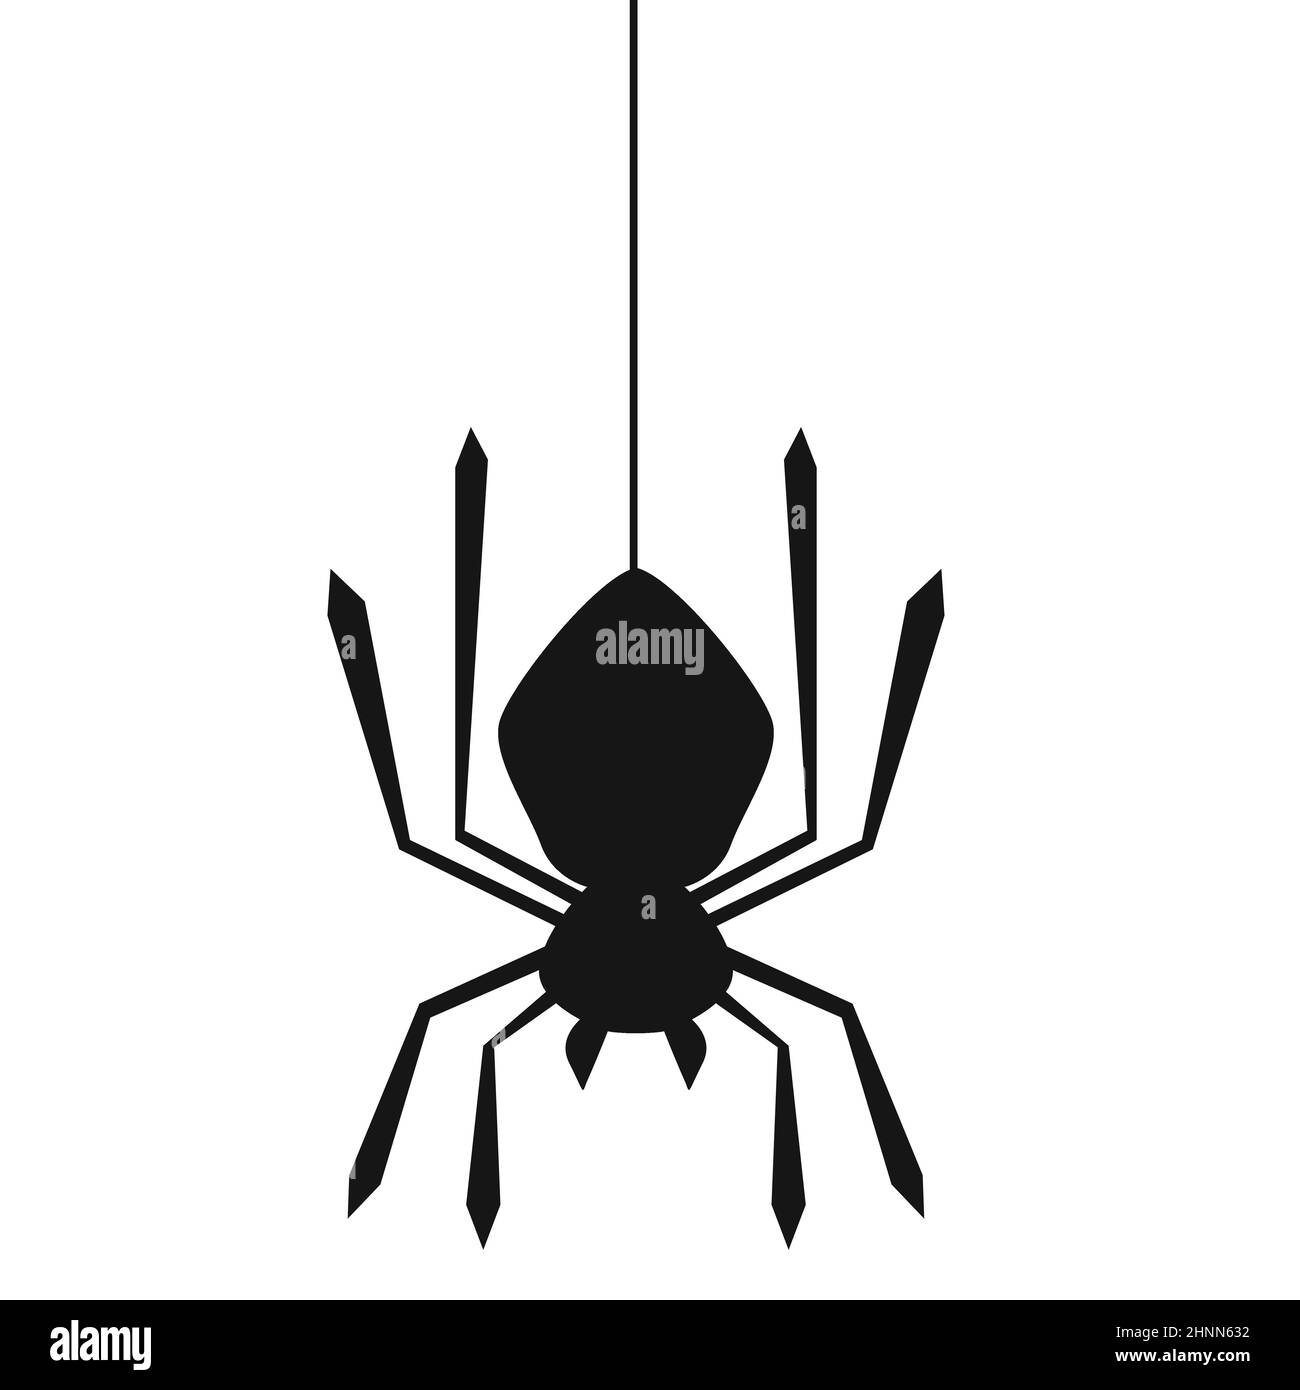 39 Spider Time Lapse Images, Stock Photos, 3D objects, & Vectors